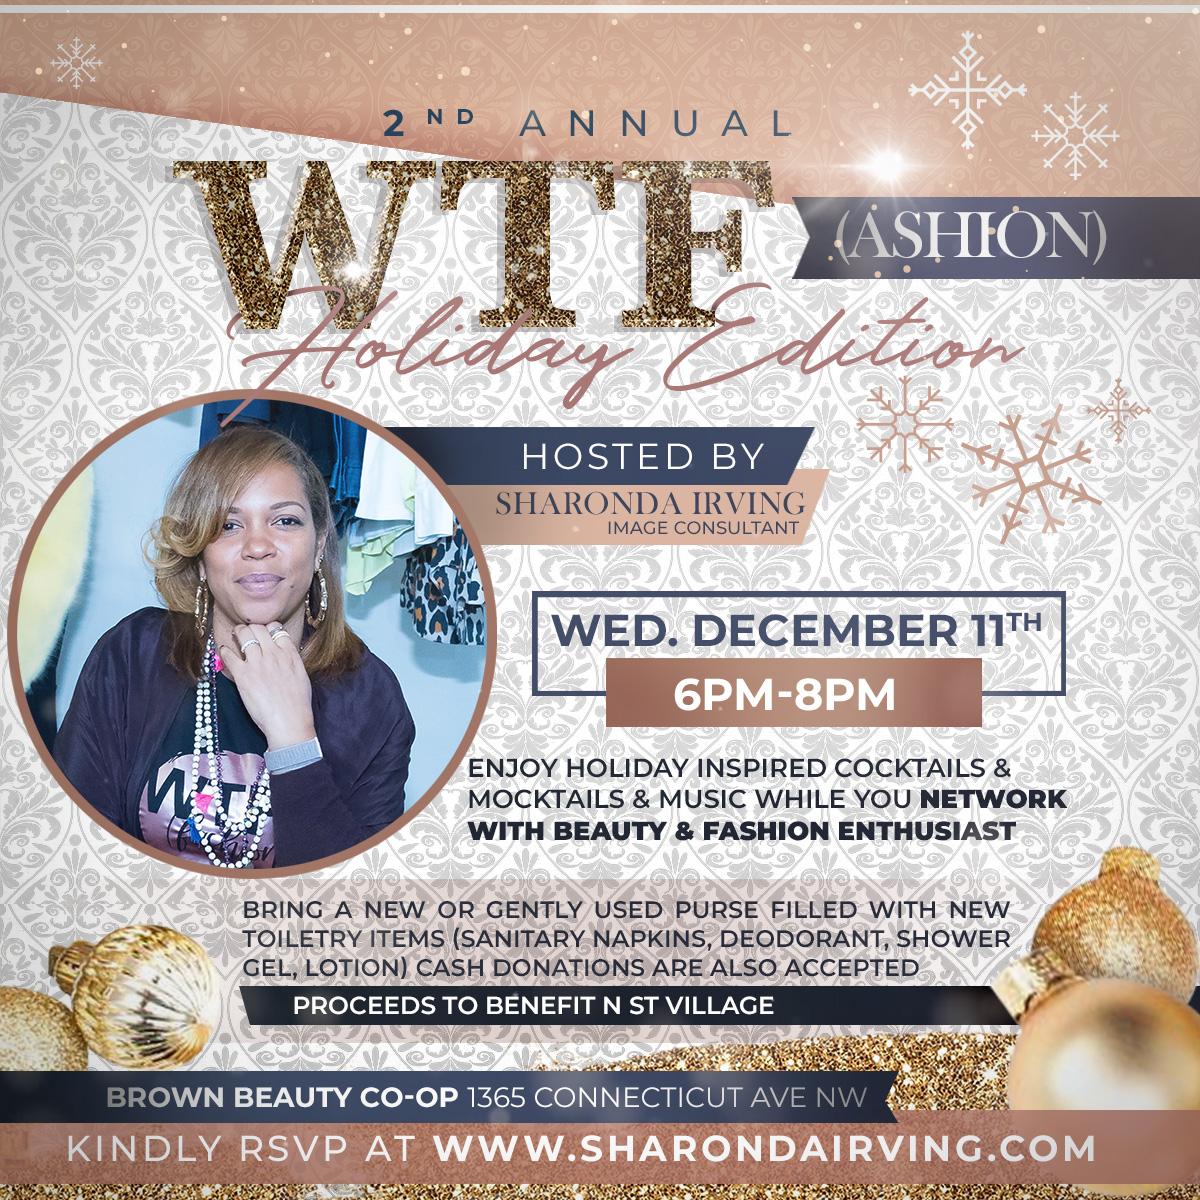 2nd ANNUAL WTF: HOLIDAY EDITION & TOILETRY DRIVE